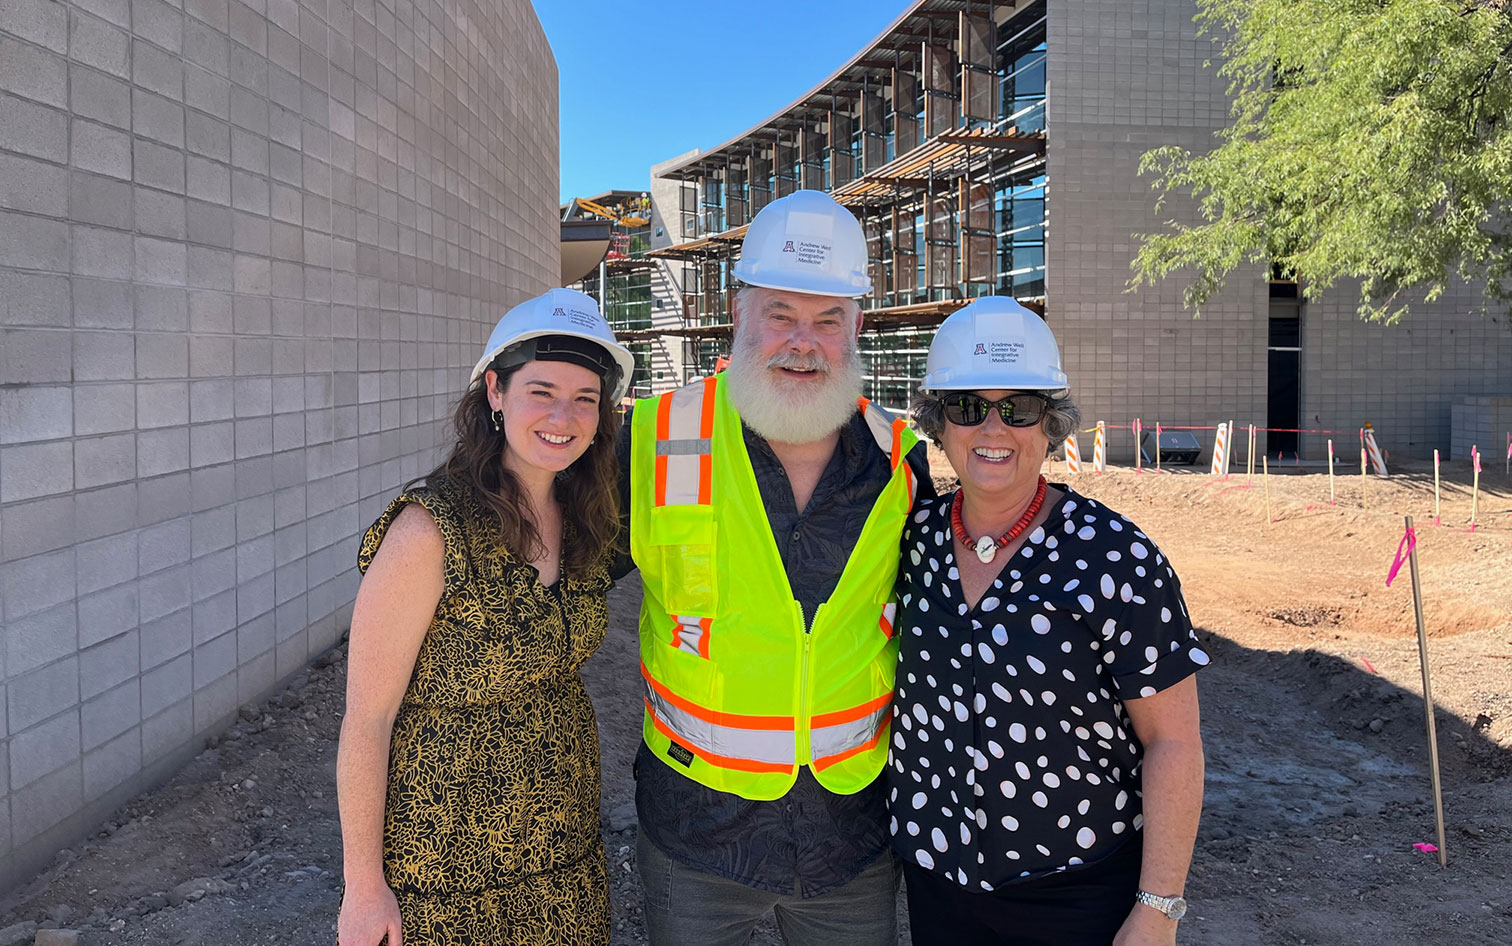 Dr. Sternberg with Dr. Andrew Weil and Mirelle Phillips, CEO of Studio Elsewhere, visiting construction site of the new Andrew Weil Center for Integrative Medicine building complex at the University of Arizona, Tucson.